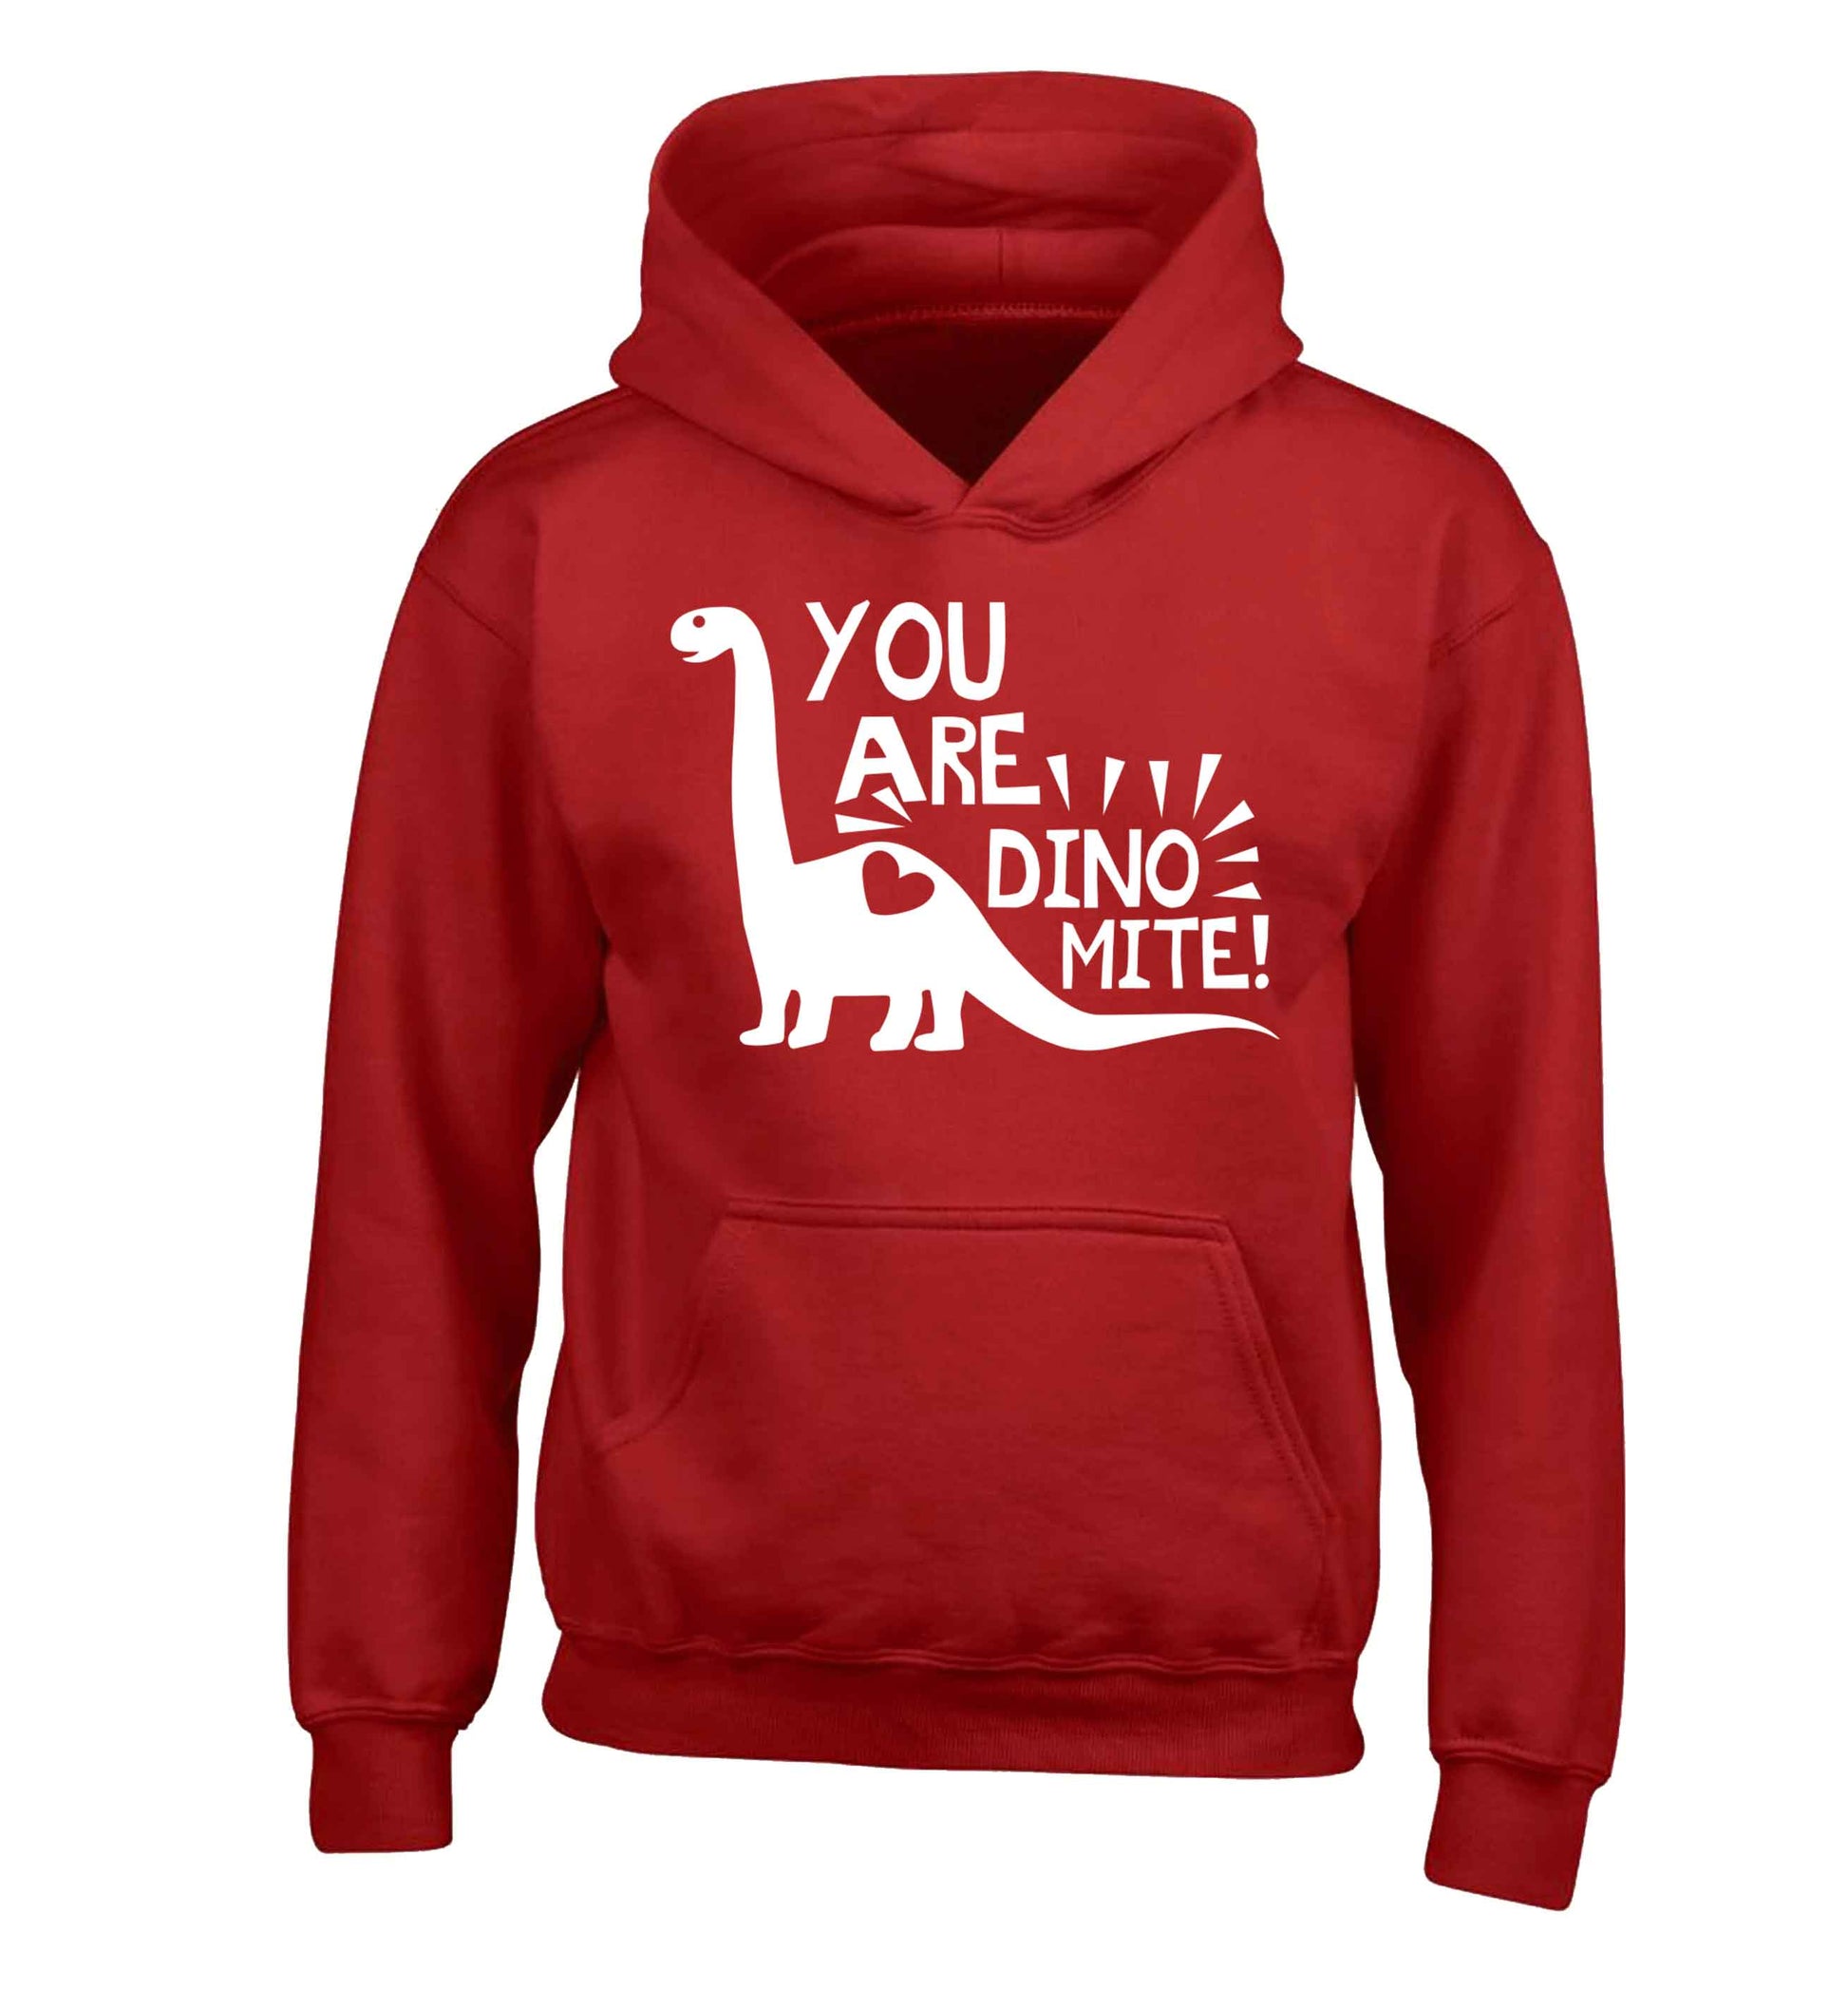 You are dinomite! children's red hoodie 12-13 Years